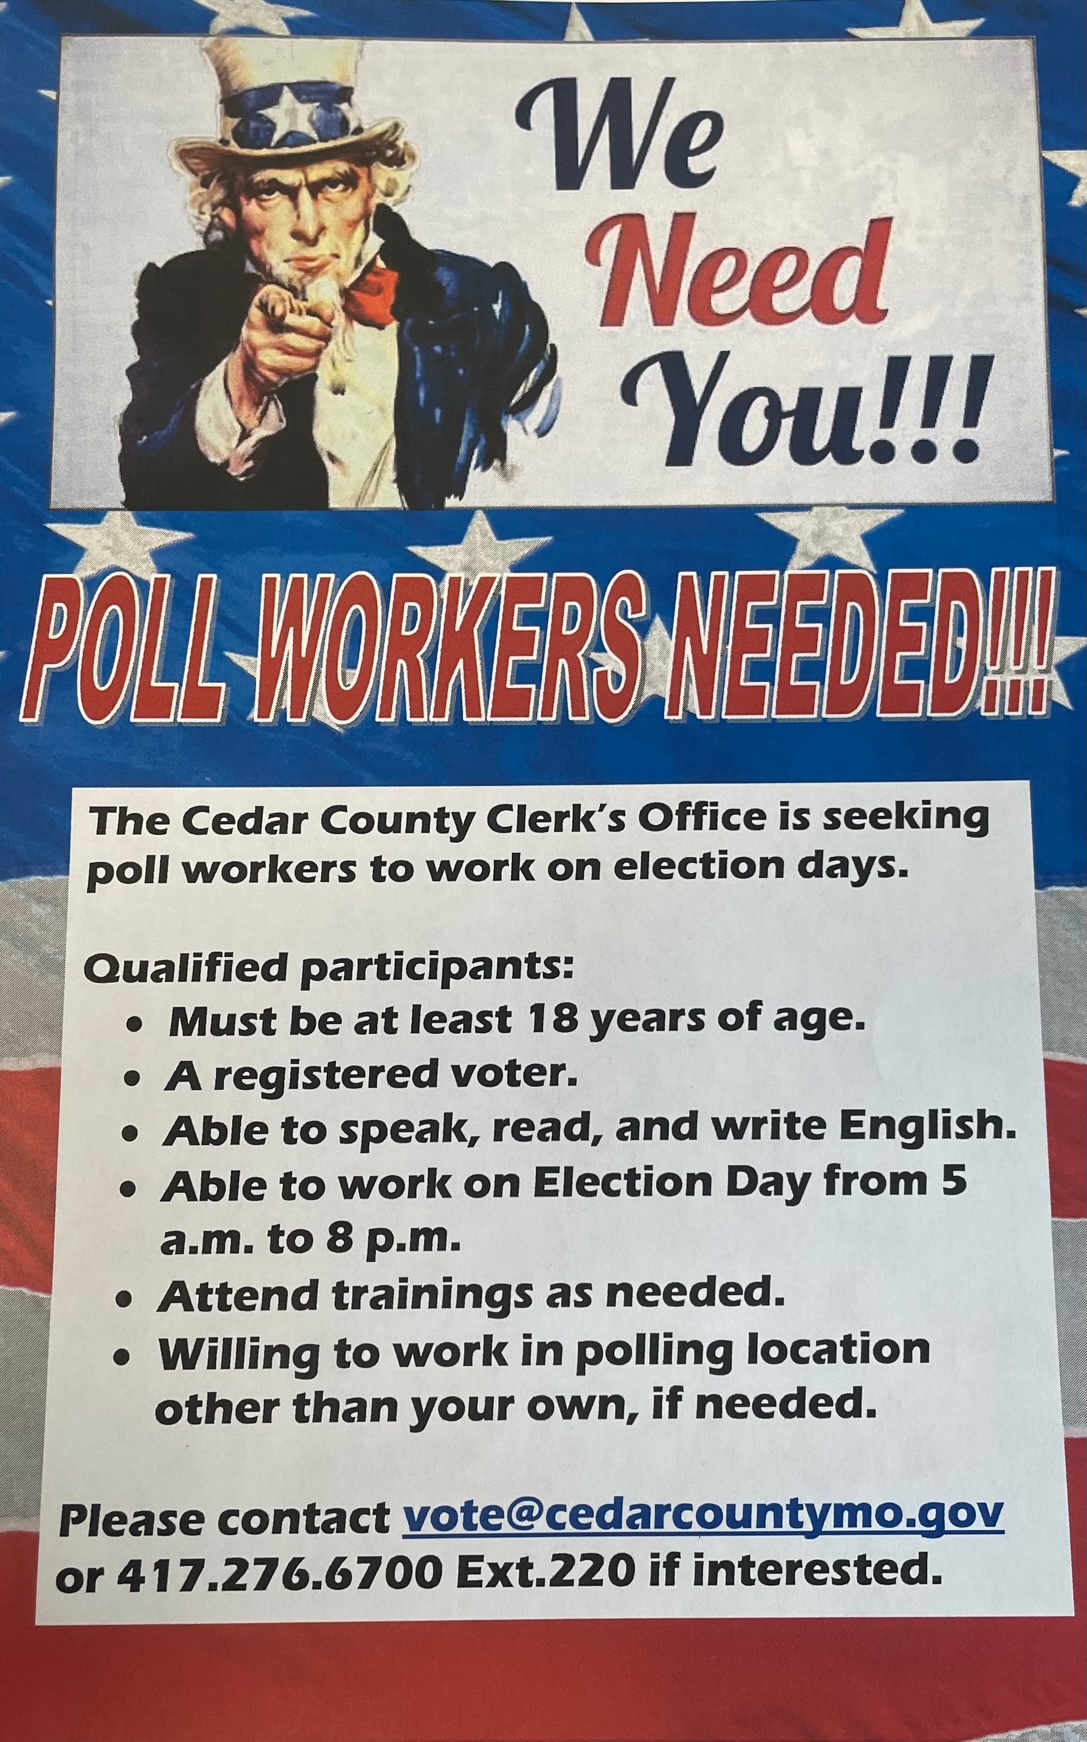 poll workers needed